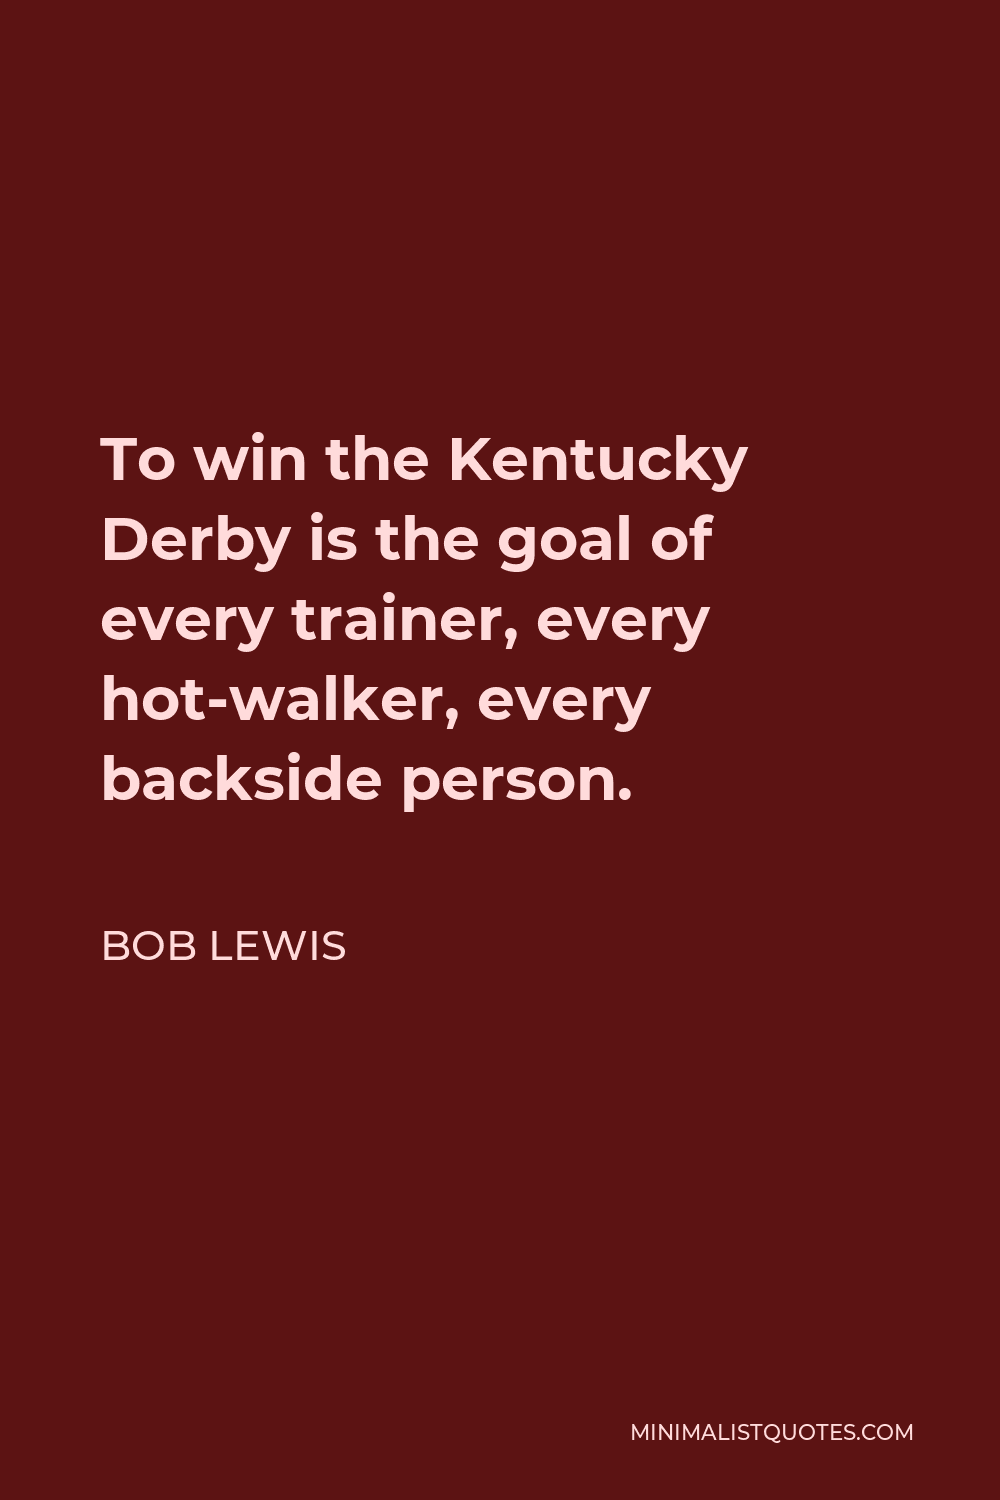 Bob Lewis Quote - To win the Kentucky Derby is the goal of every trainer, every hot-walker, every backside person.